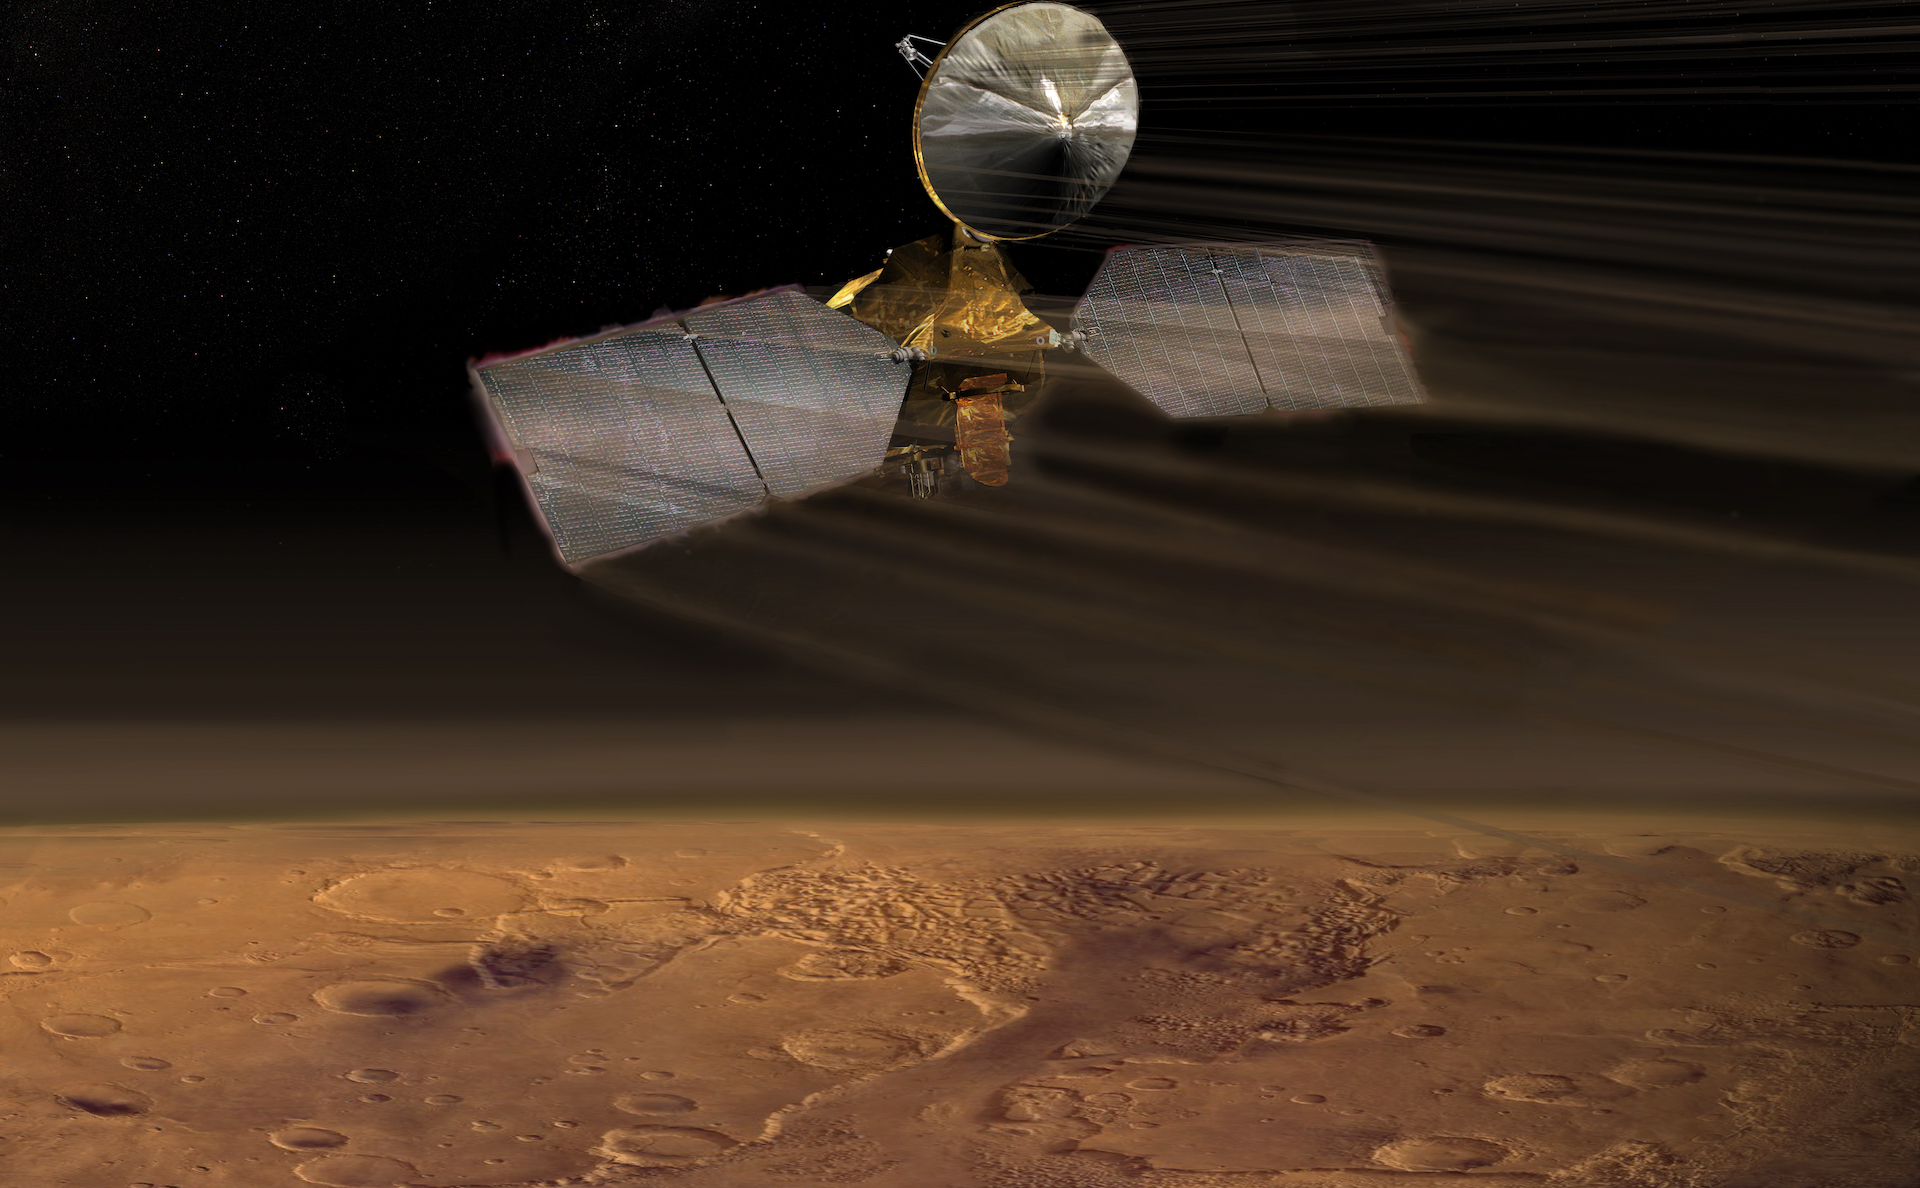 NASA's Mars Reconnaissance Orbiter dips into the thin Martian atmosphere to adjust its orbit in this artist's concept illustration.